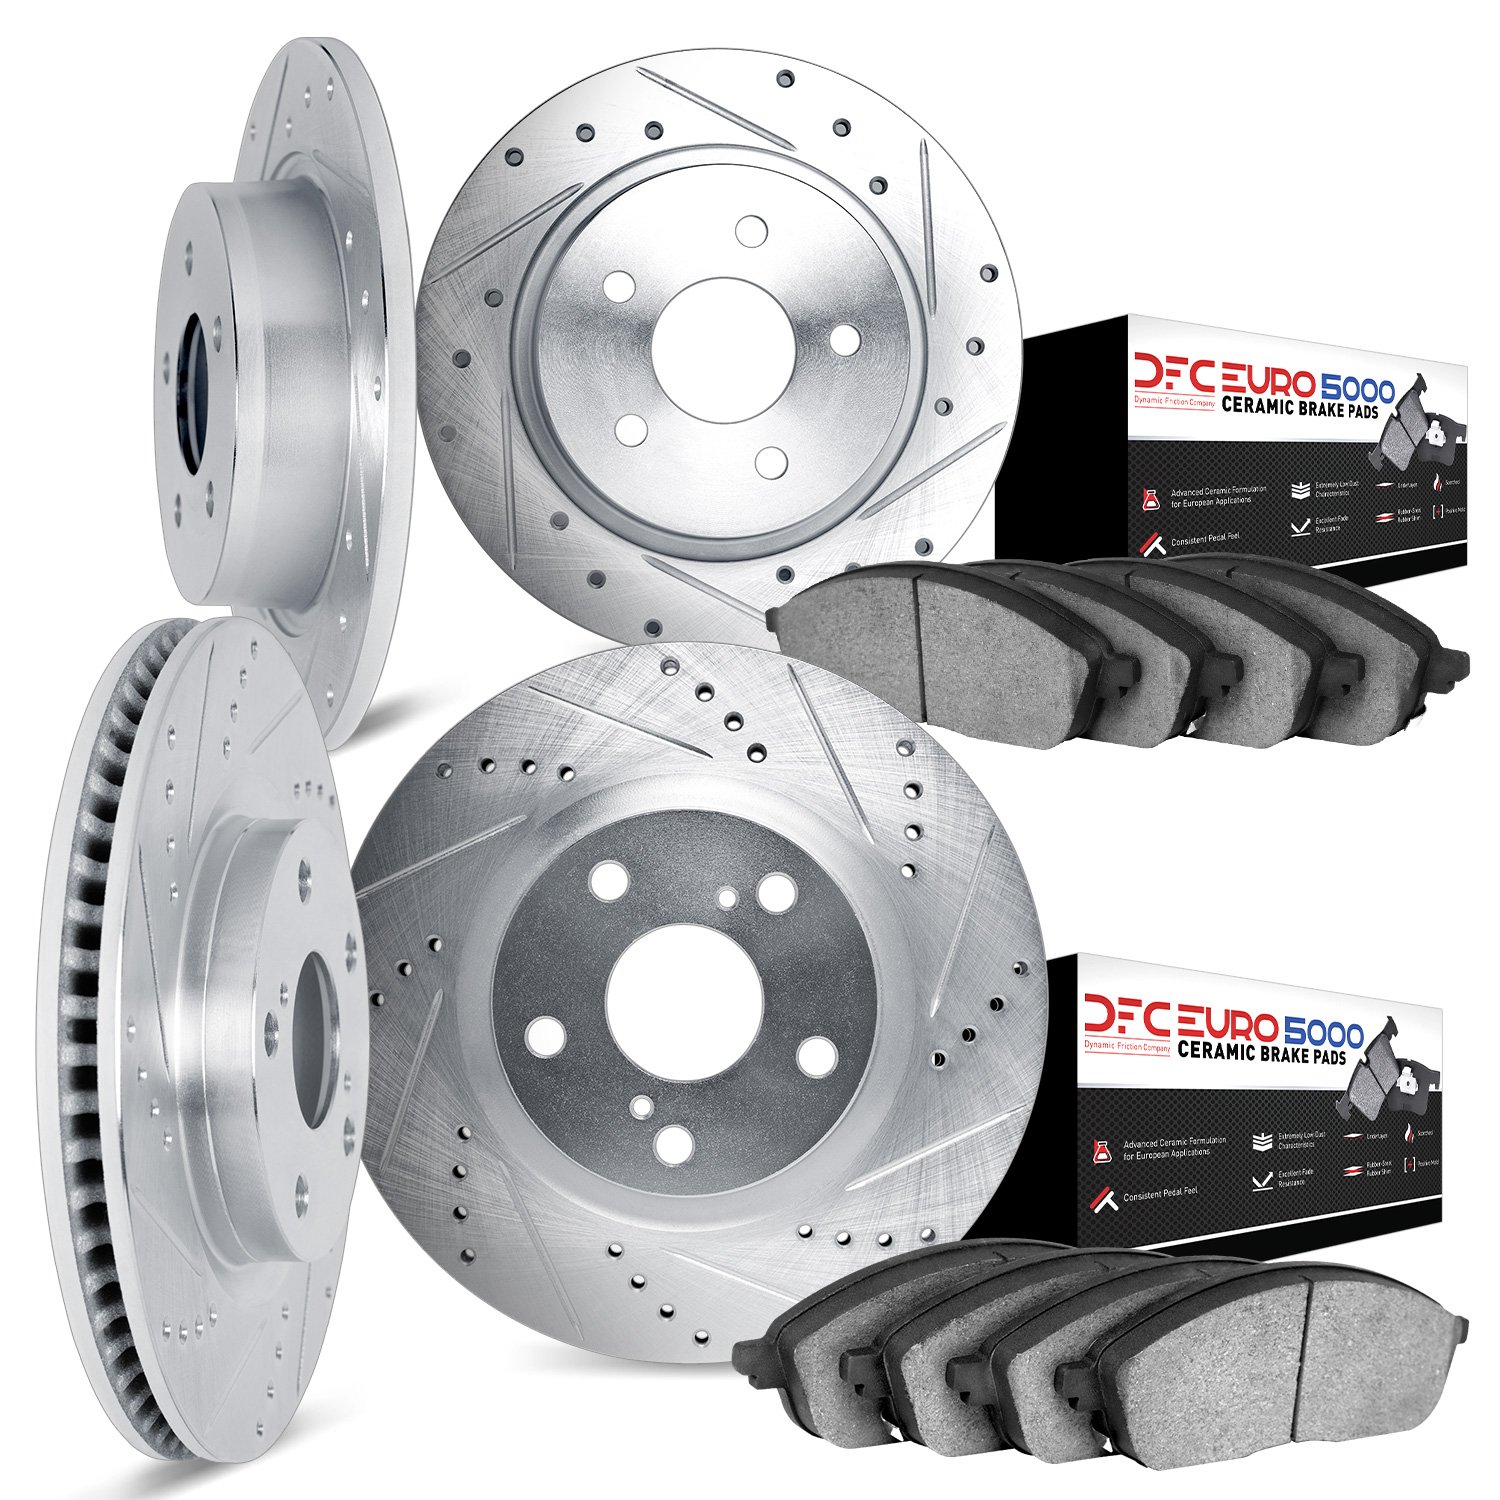 7604-11001 Drilled/Slotted Brake Rotors w/5000 Euro Ceramic Brake Pads Kit [Silver], 1999-2004 Land Rover, Position: Front and R